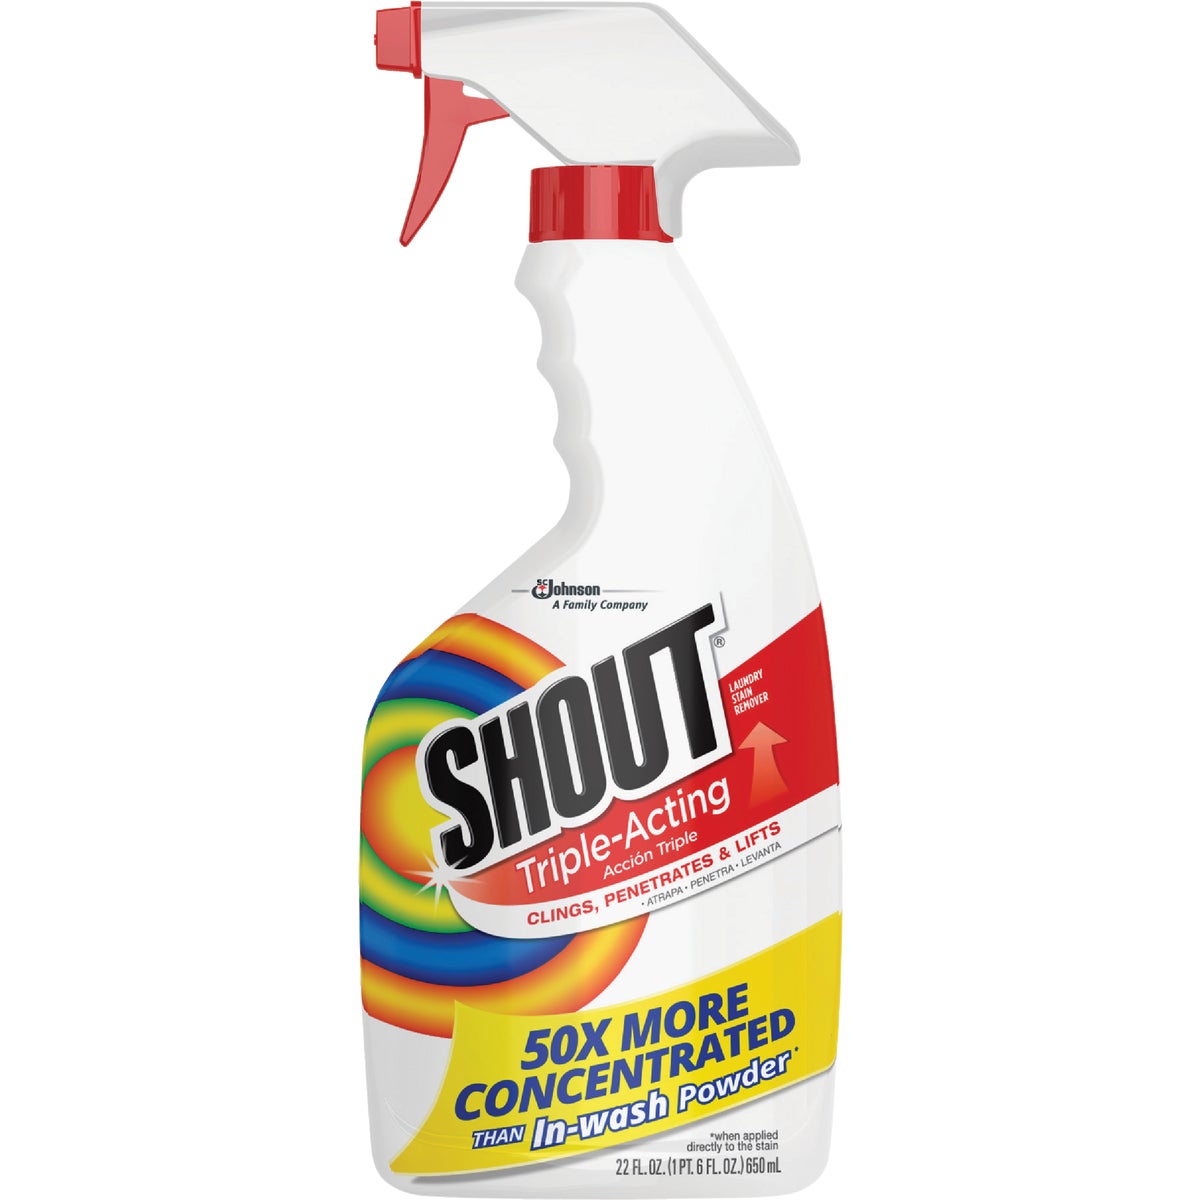 Item 617167, Shout formula stain remover combines the cleaning power of lemon with stain